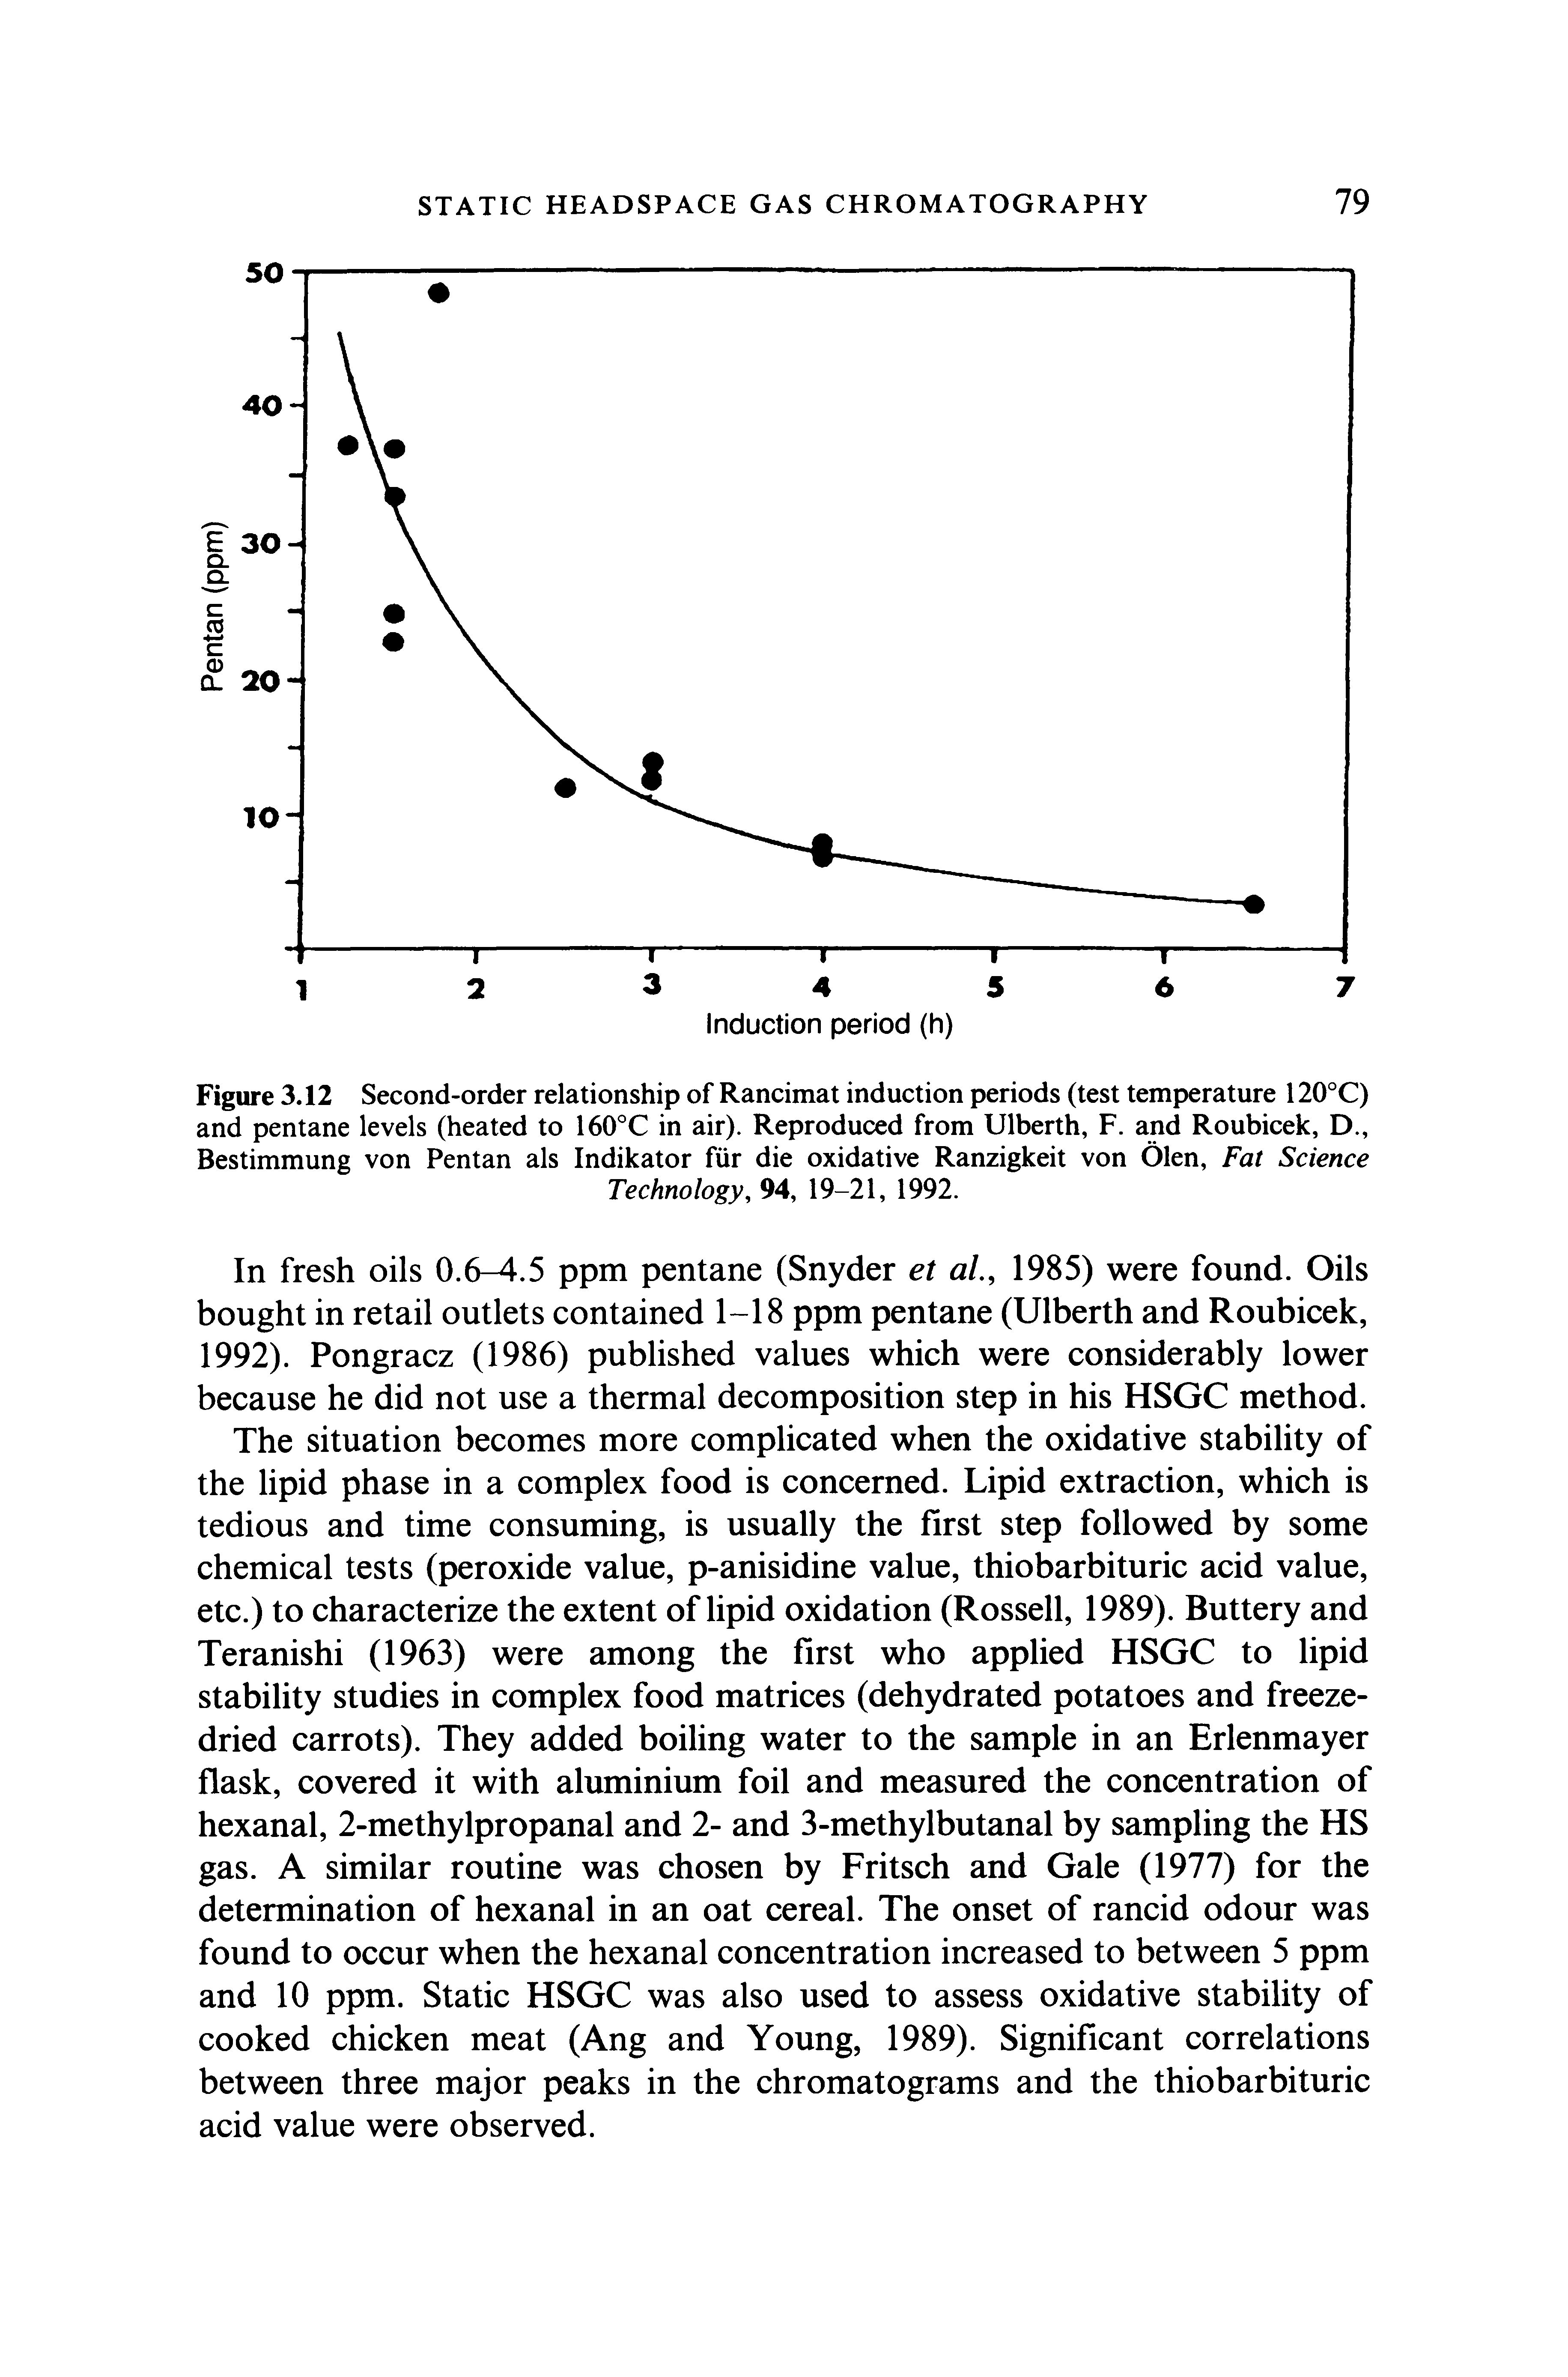 Figure 3.12 Second-order relationship of Rancimat induction periods (test temperature 120°C) and pentane levels (heated to 160°C in air). Reproduced from Ulberth, F. and Roubicek, D., Bestimmung von Pentan als Indikator fur die oxidative Ranzigkeit von Olen, Fat Science...